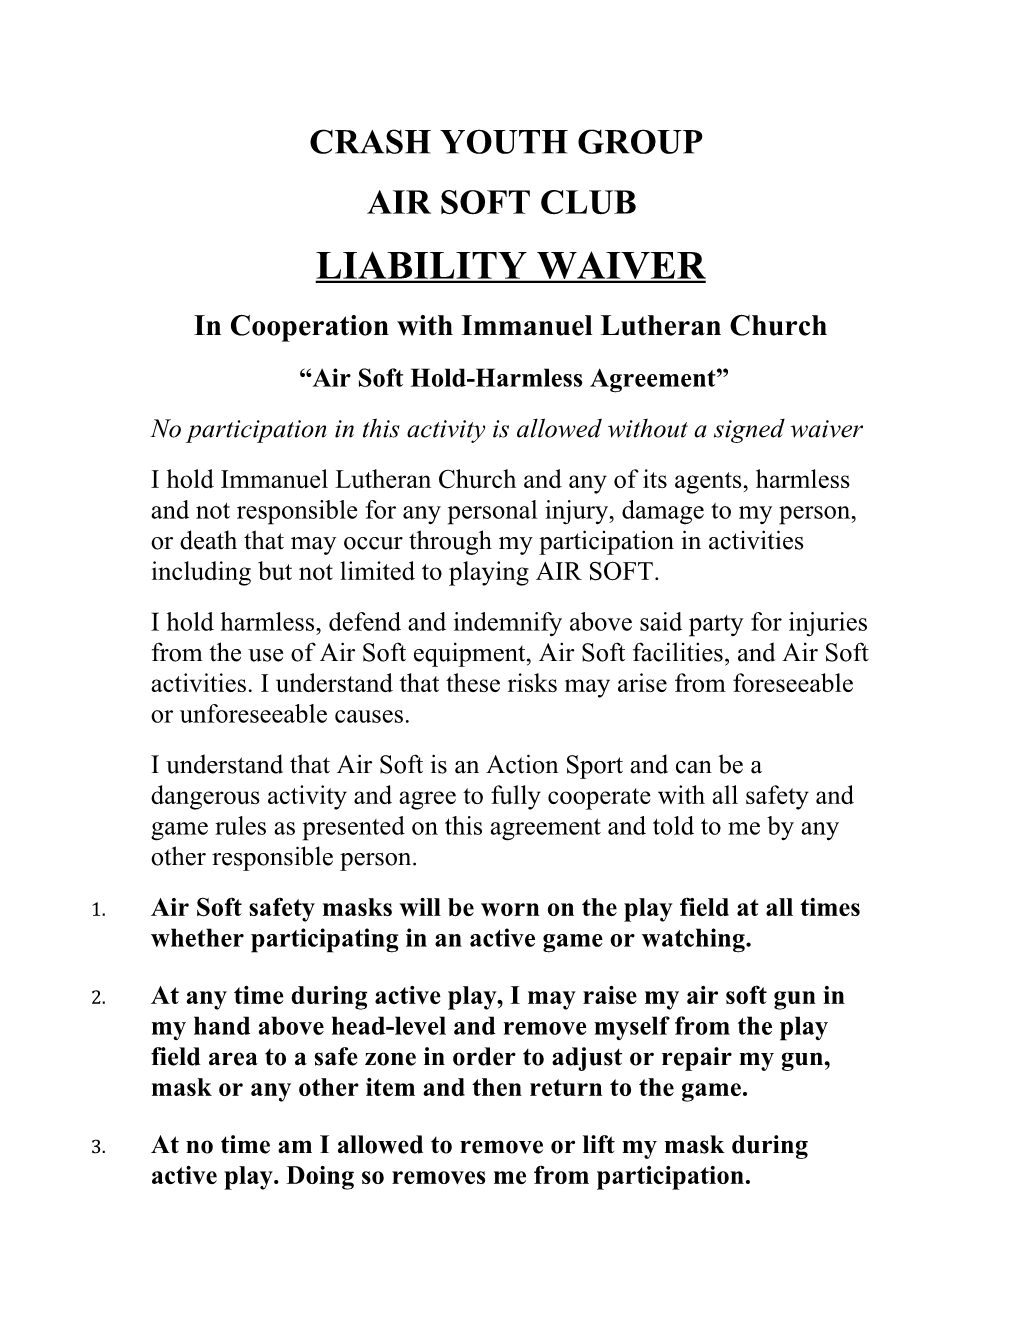 In Cooperation with Immanuel Lutheran Church